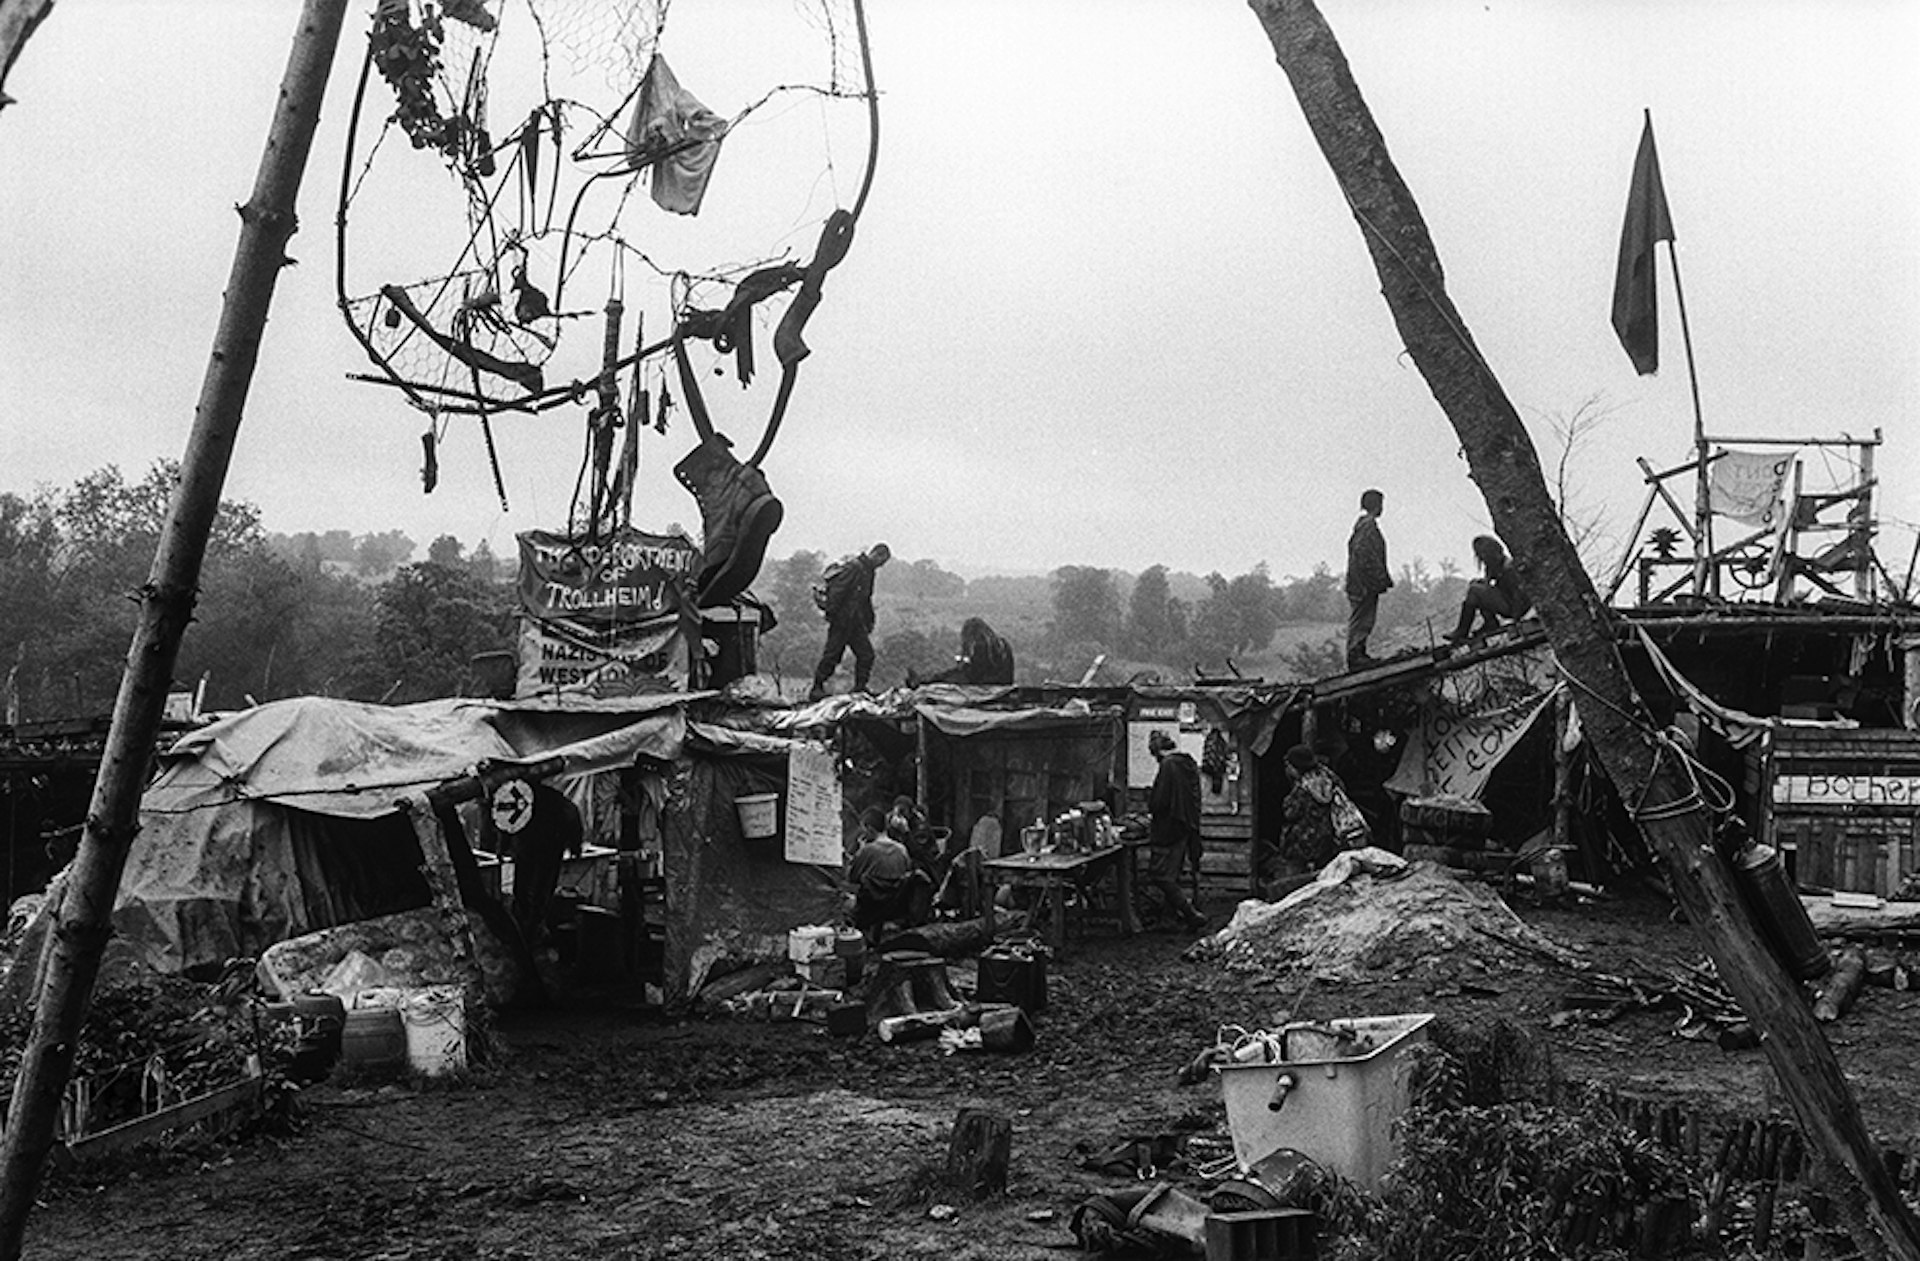 At the Fairmile, Trollheim and Allercombe protest camps in Devon, 1996.